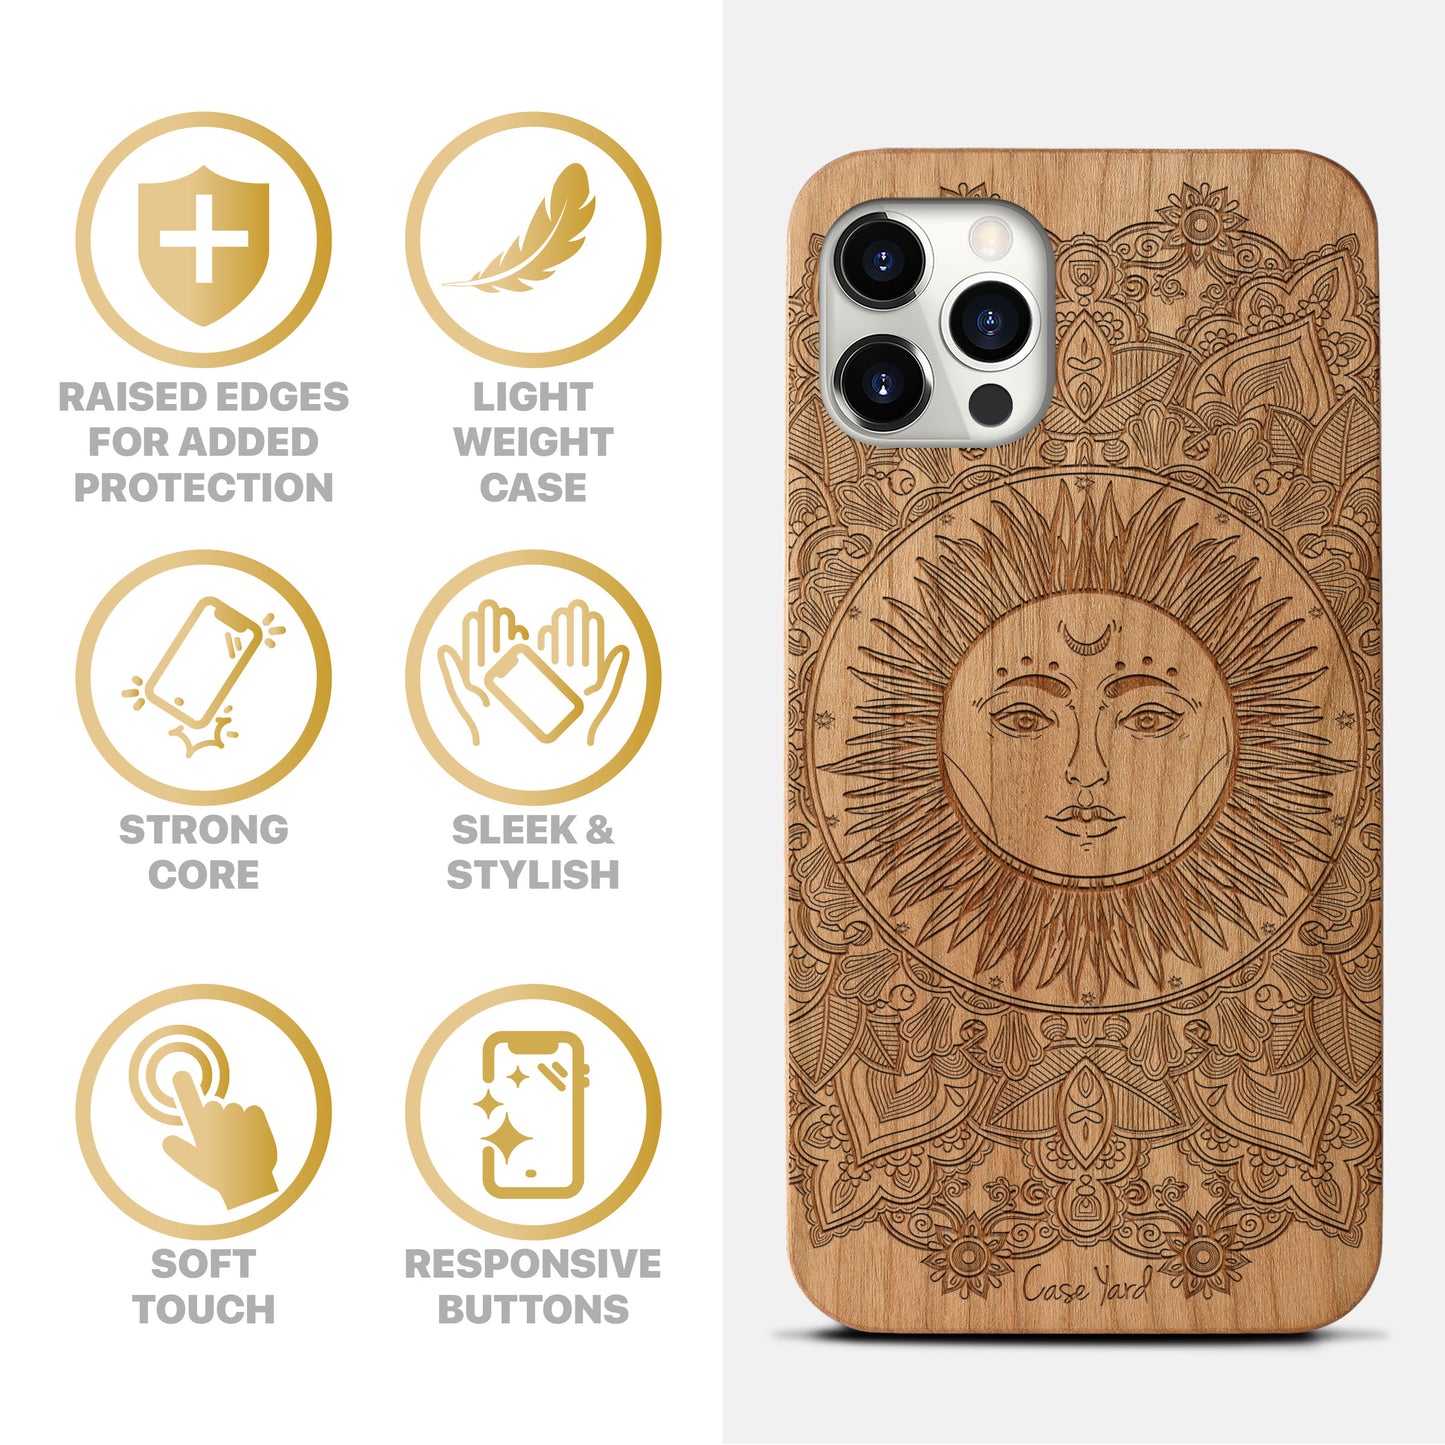 Wooden Cell Phone Case Cover, Laser Engraved case for iPhone & Samsung phone Sun Mandala Design